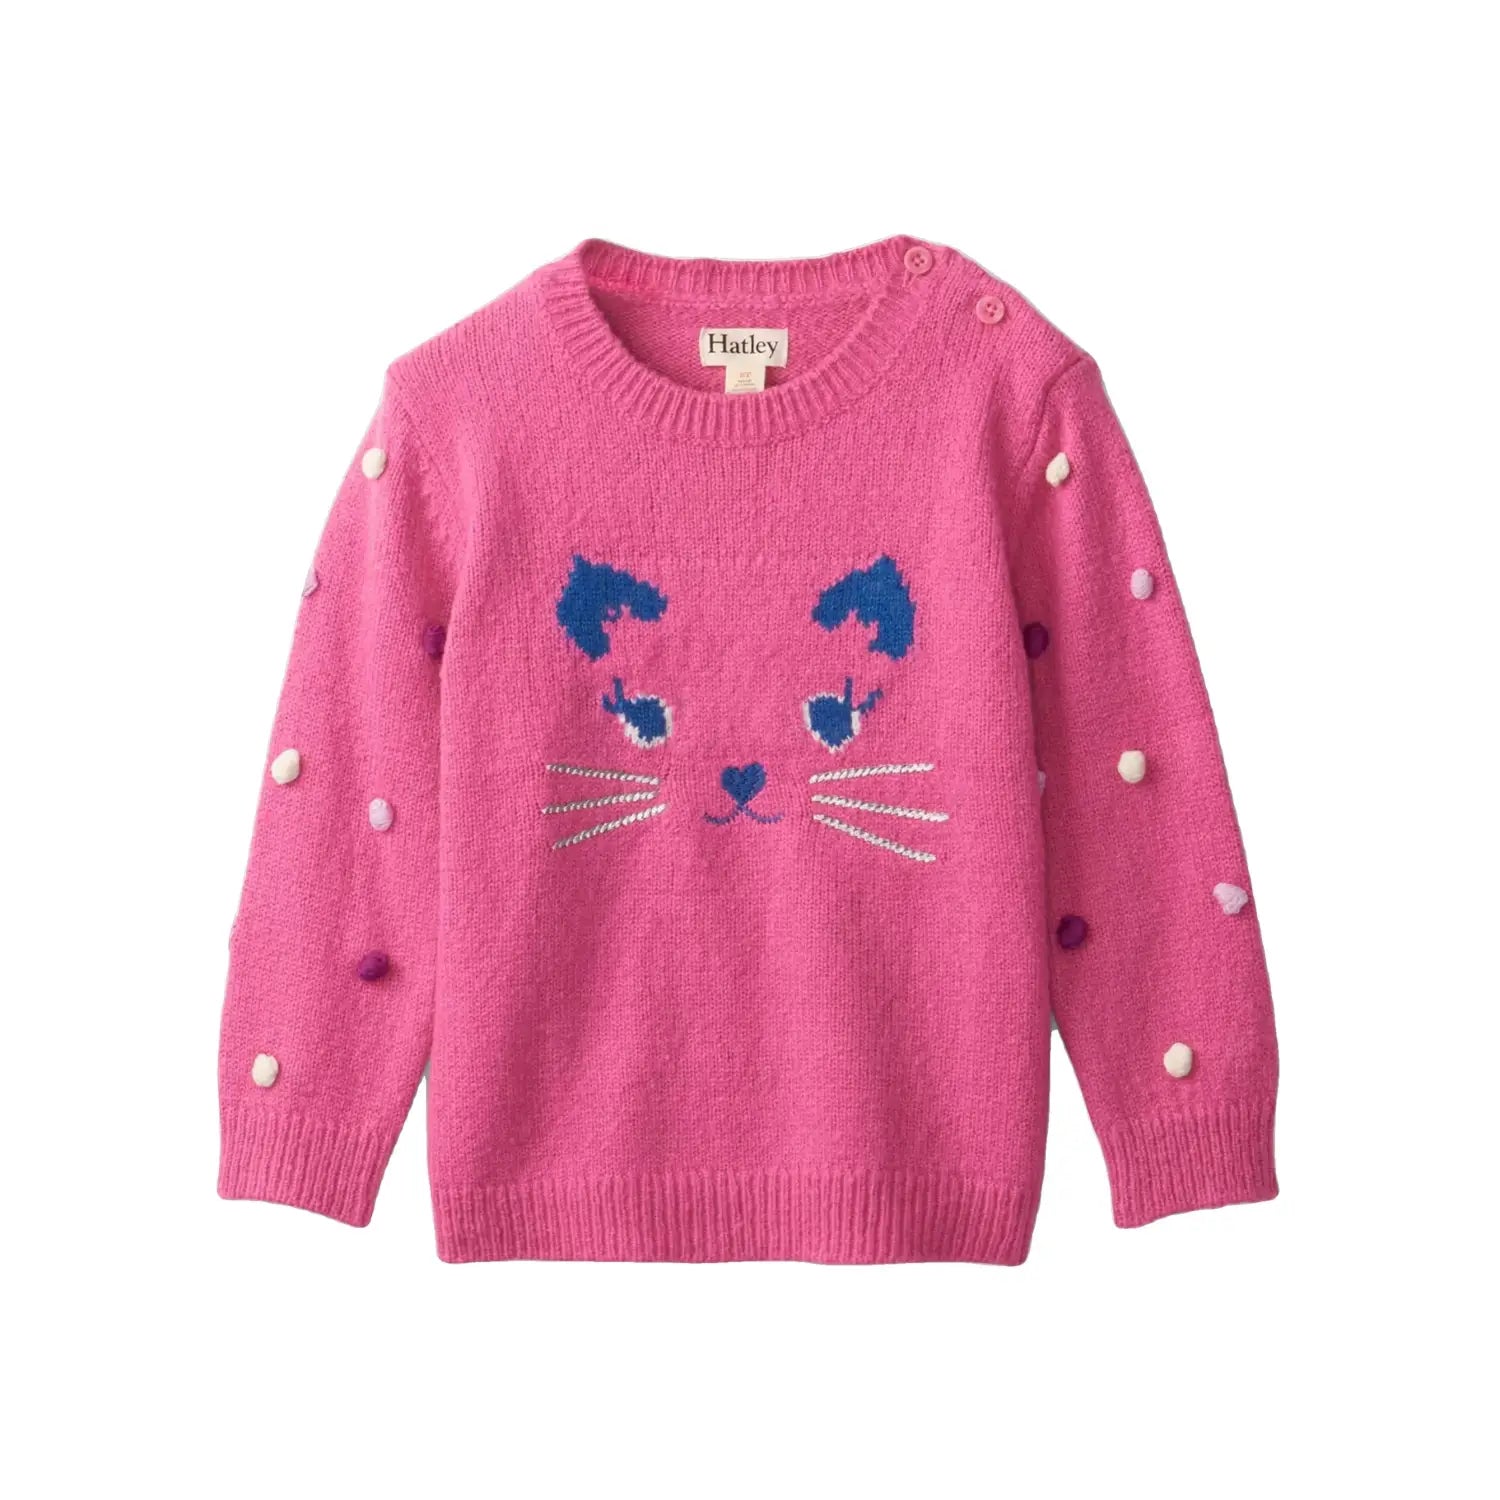 Hatley Baby Kitten Pretty Sweater, Rose Violet, front view 